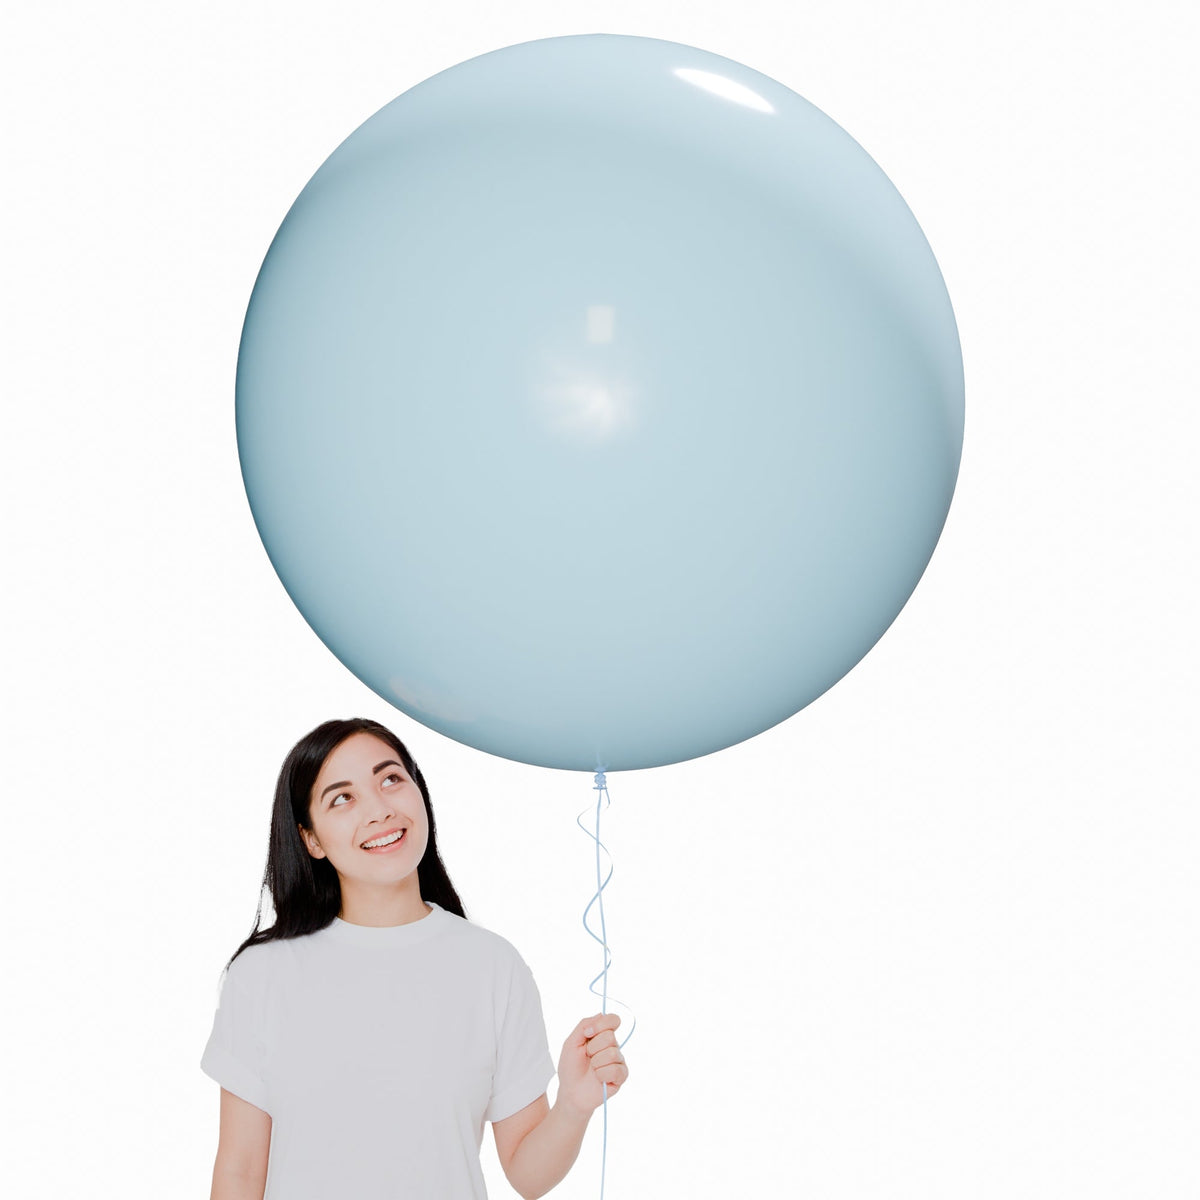 WIDE OCEAN INTERNATIONAL TRADE BEIJING CO., LTD Balloons Blue Latex Balloon 36 Inches, Macaroon Collection, 2 Count 810064198861